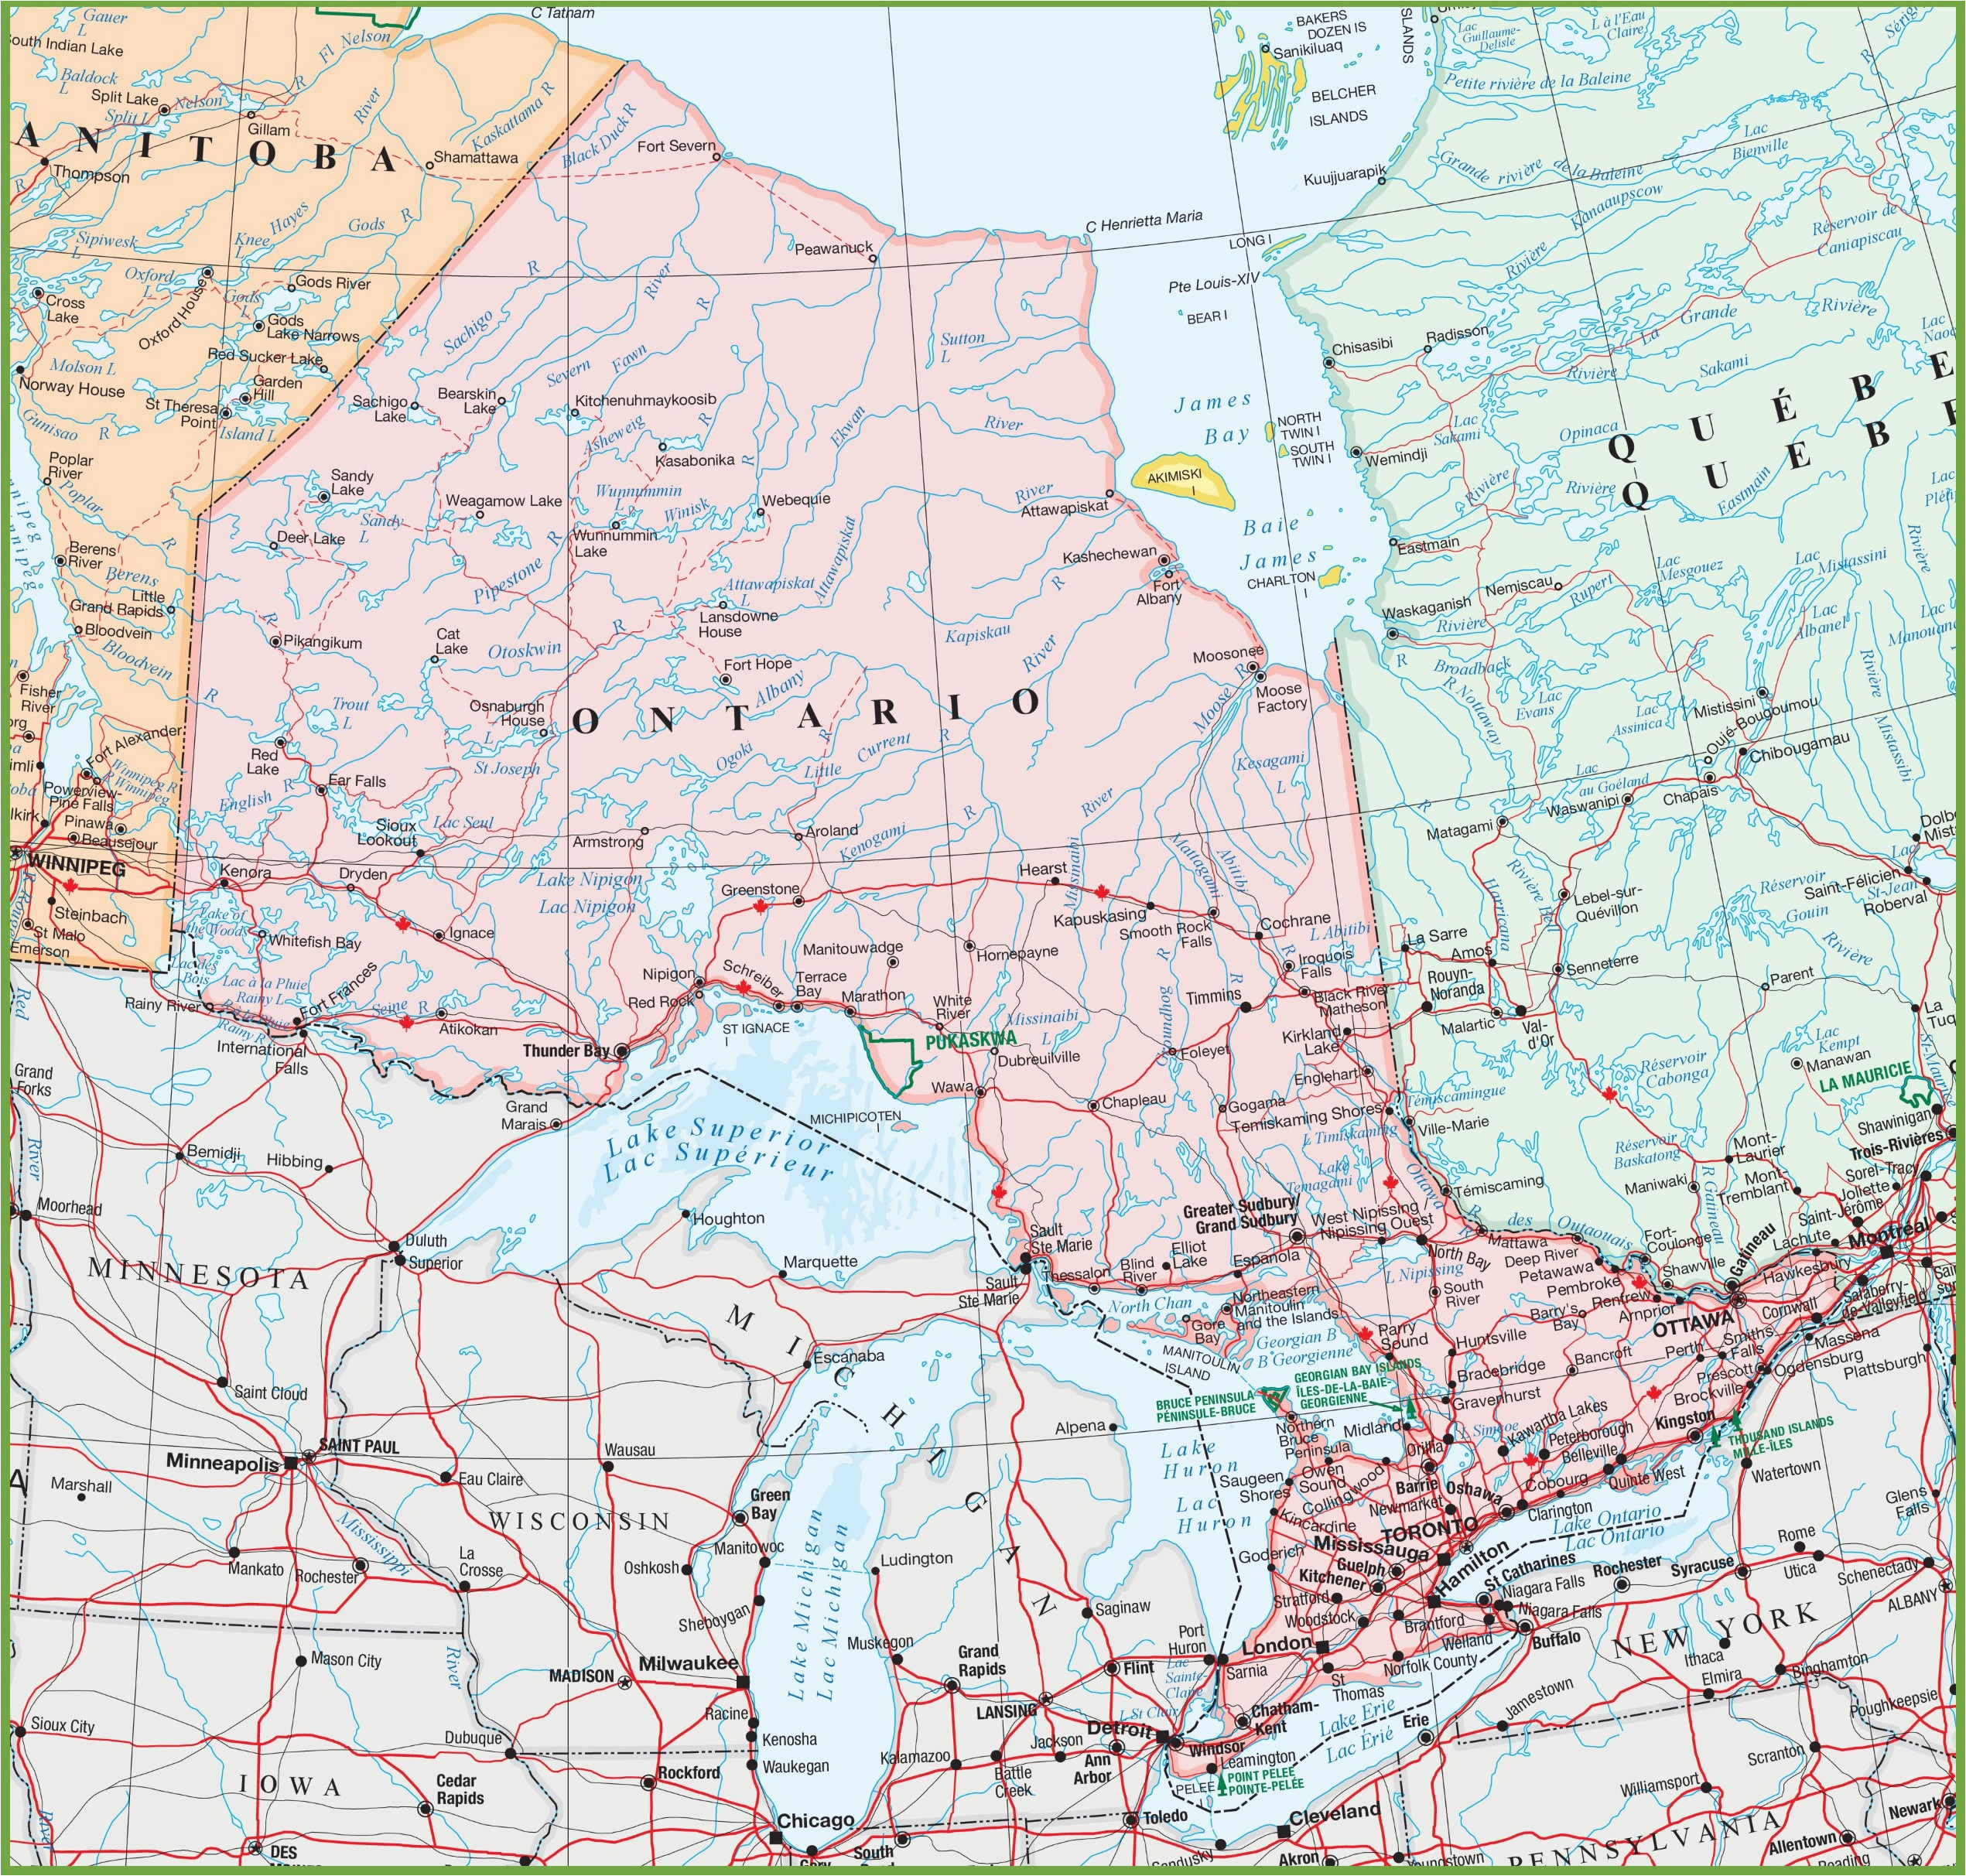 Map Of Ontario Canada Cities Map Of Ontario with Cities and towns